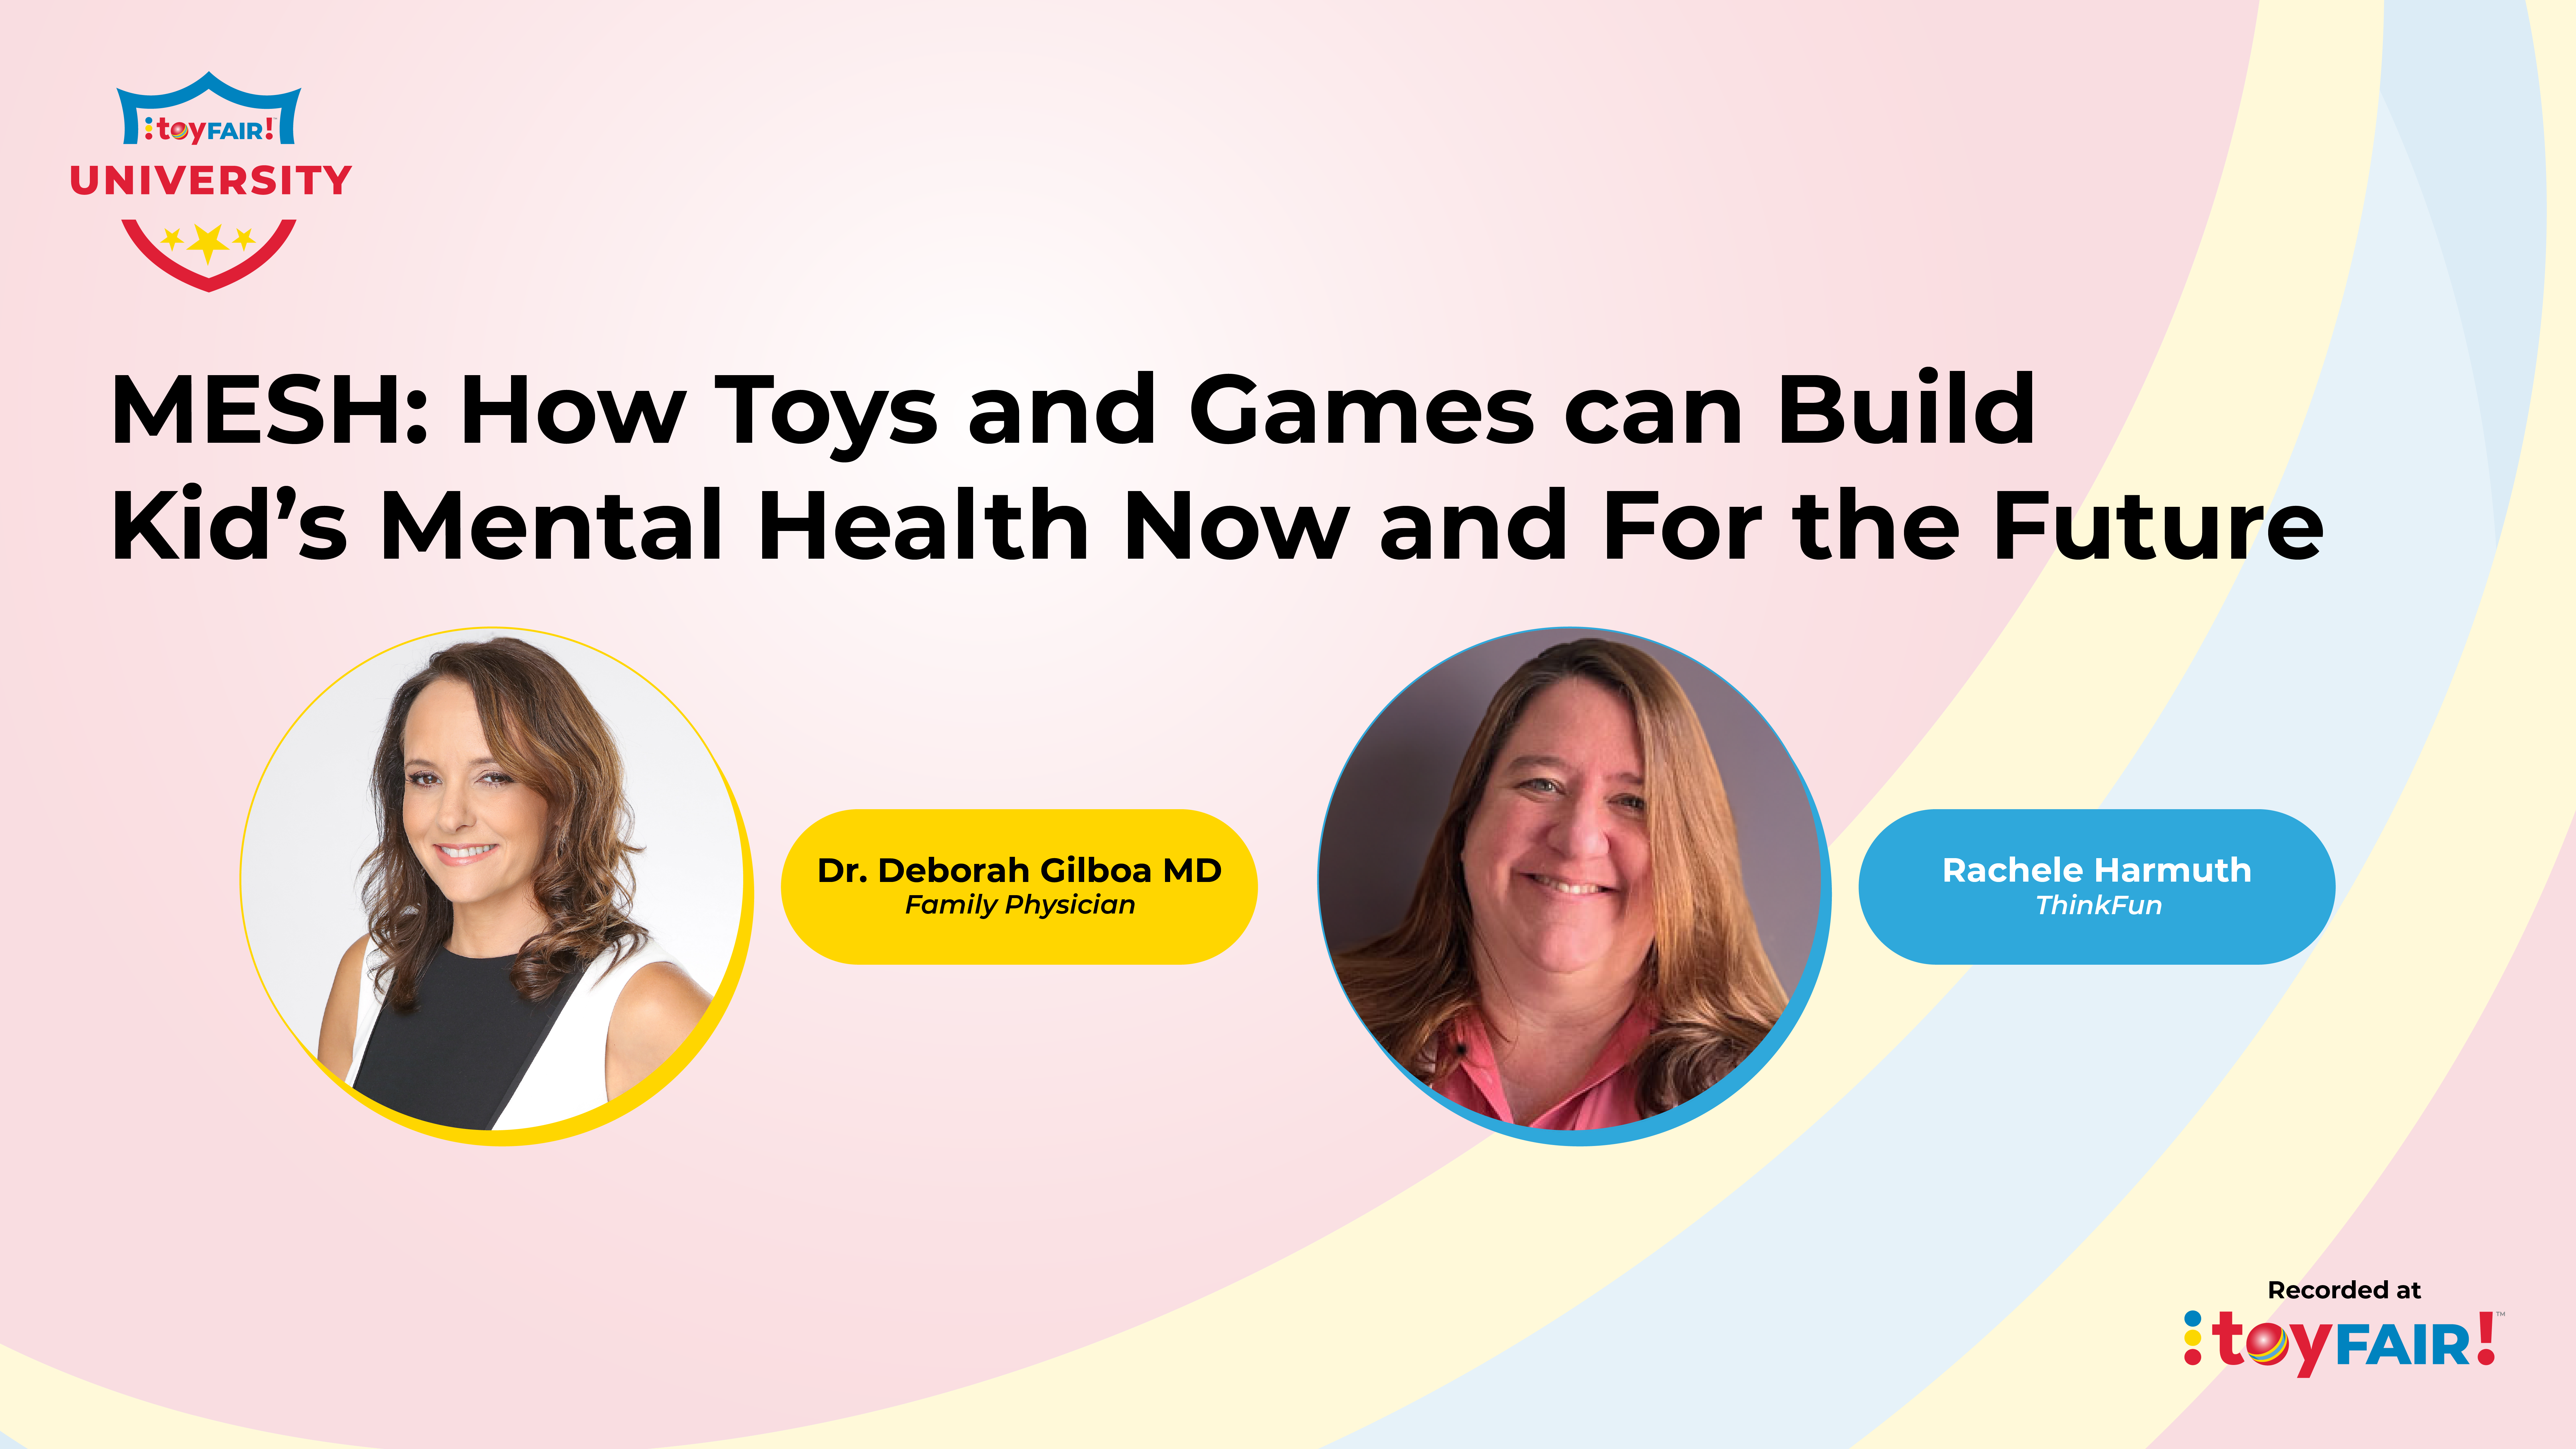 MESH: How Toys and Games can Build Kid’s Mental Health Now and For the Future